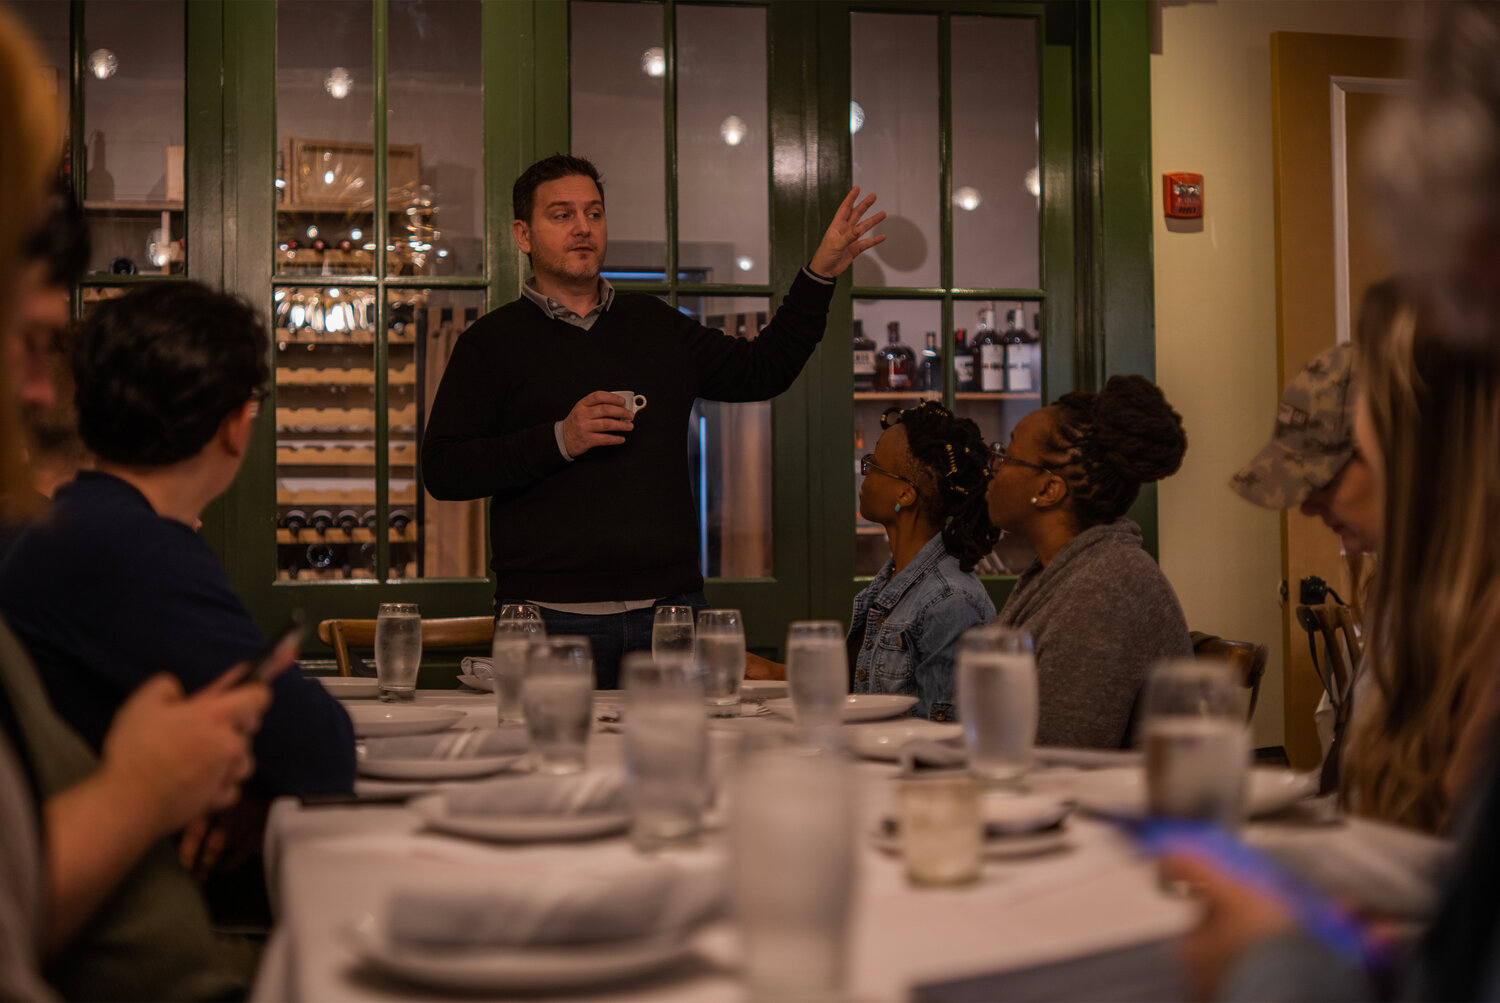 Dino DiFante tells the story of Trattoria Zooma